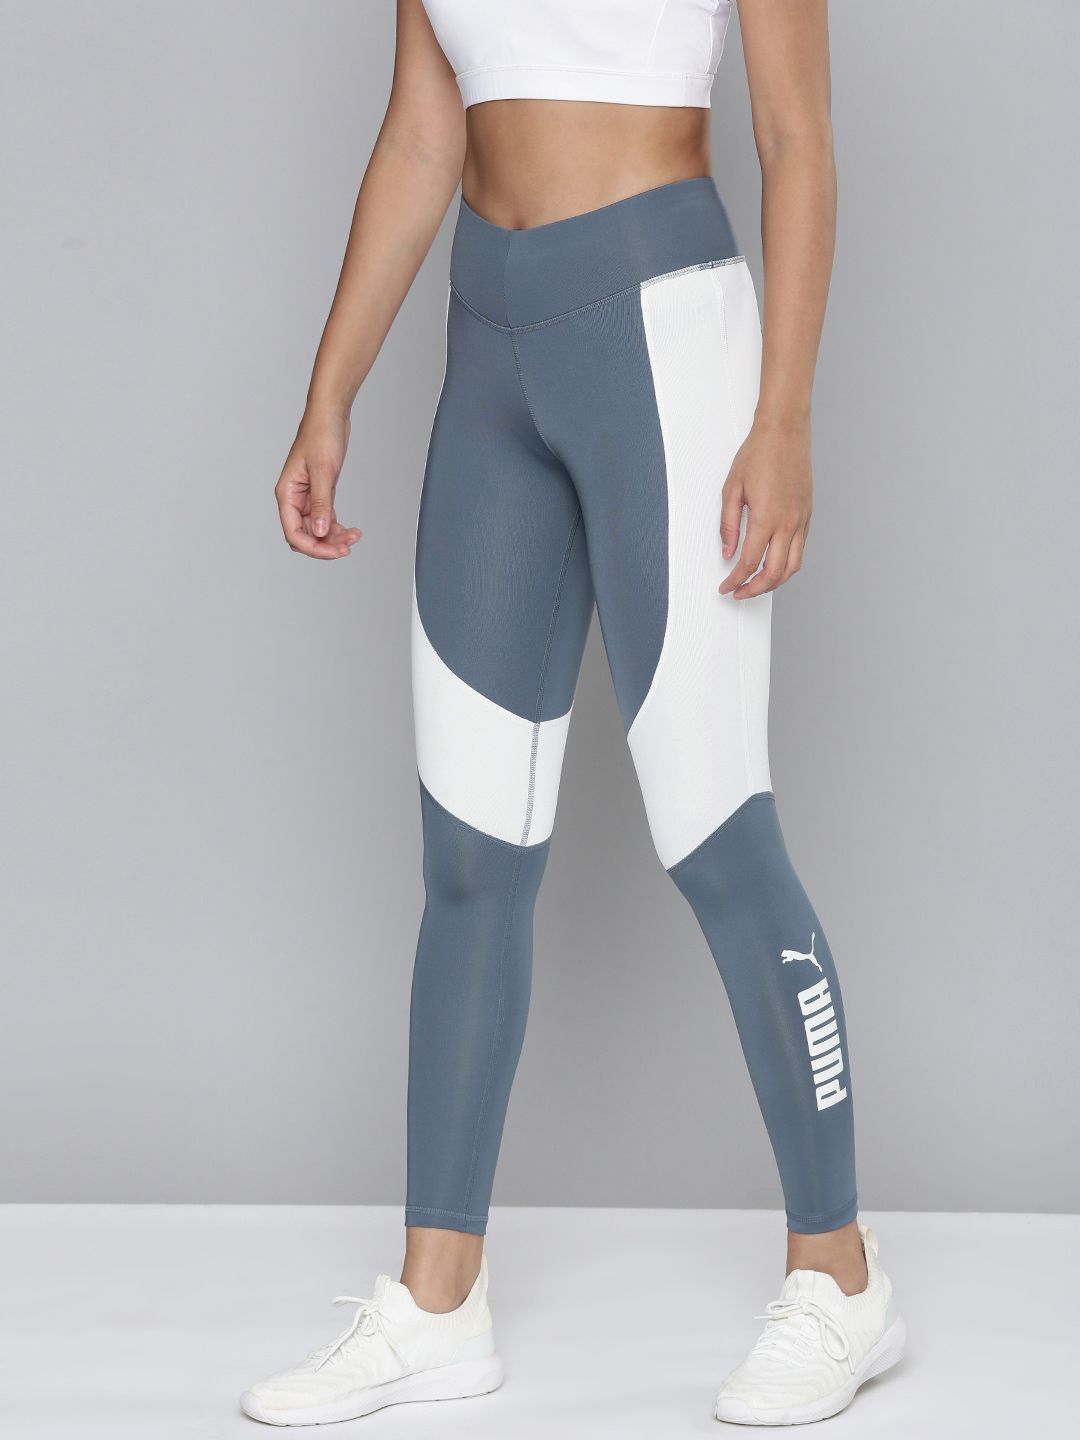 Puma Women Grey & White Favourite Logo dryCELL High Waist 7/8 Training Tights Price in India